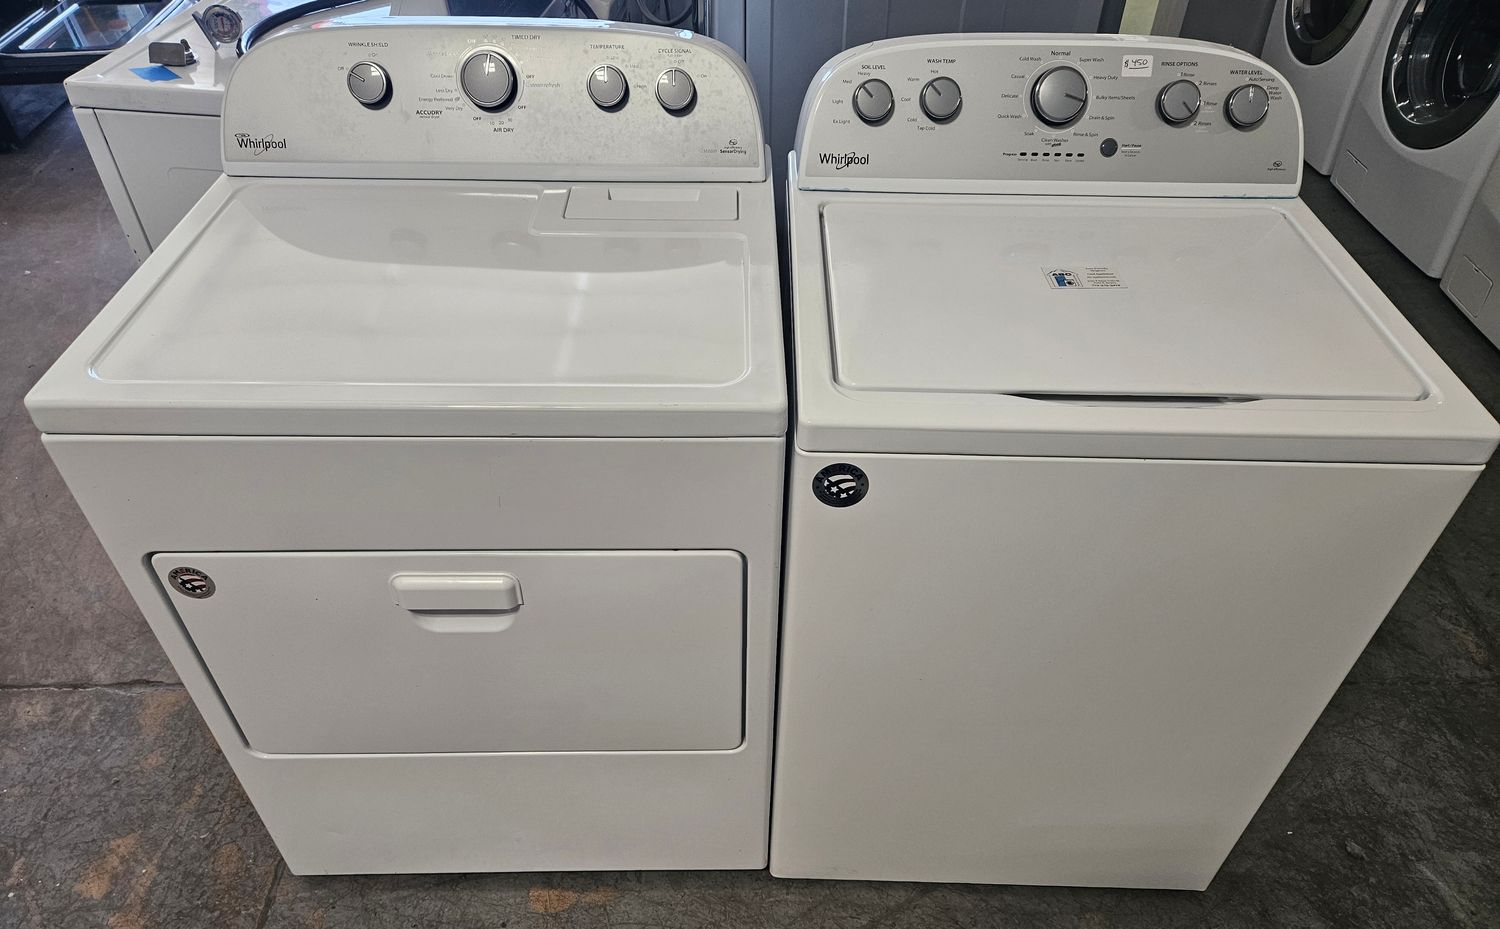 Matching Whirlpool Large Capacity Electric Washer Dryer